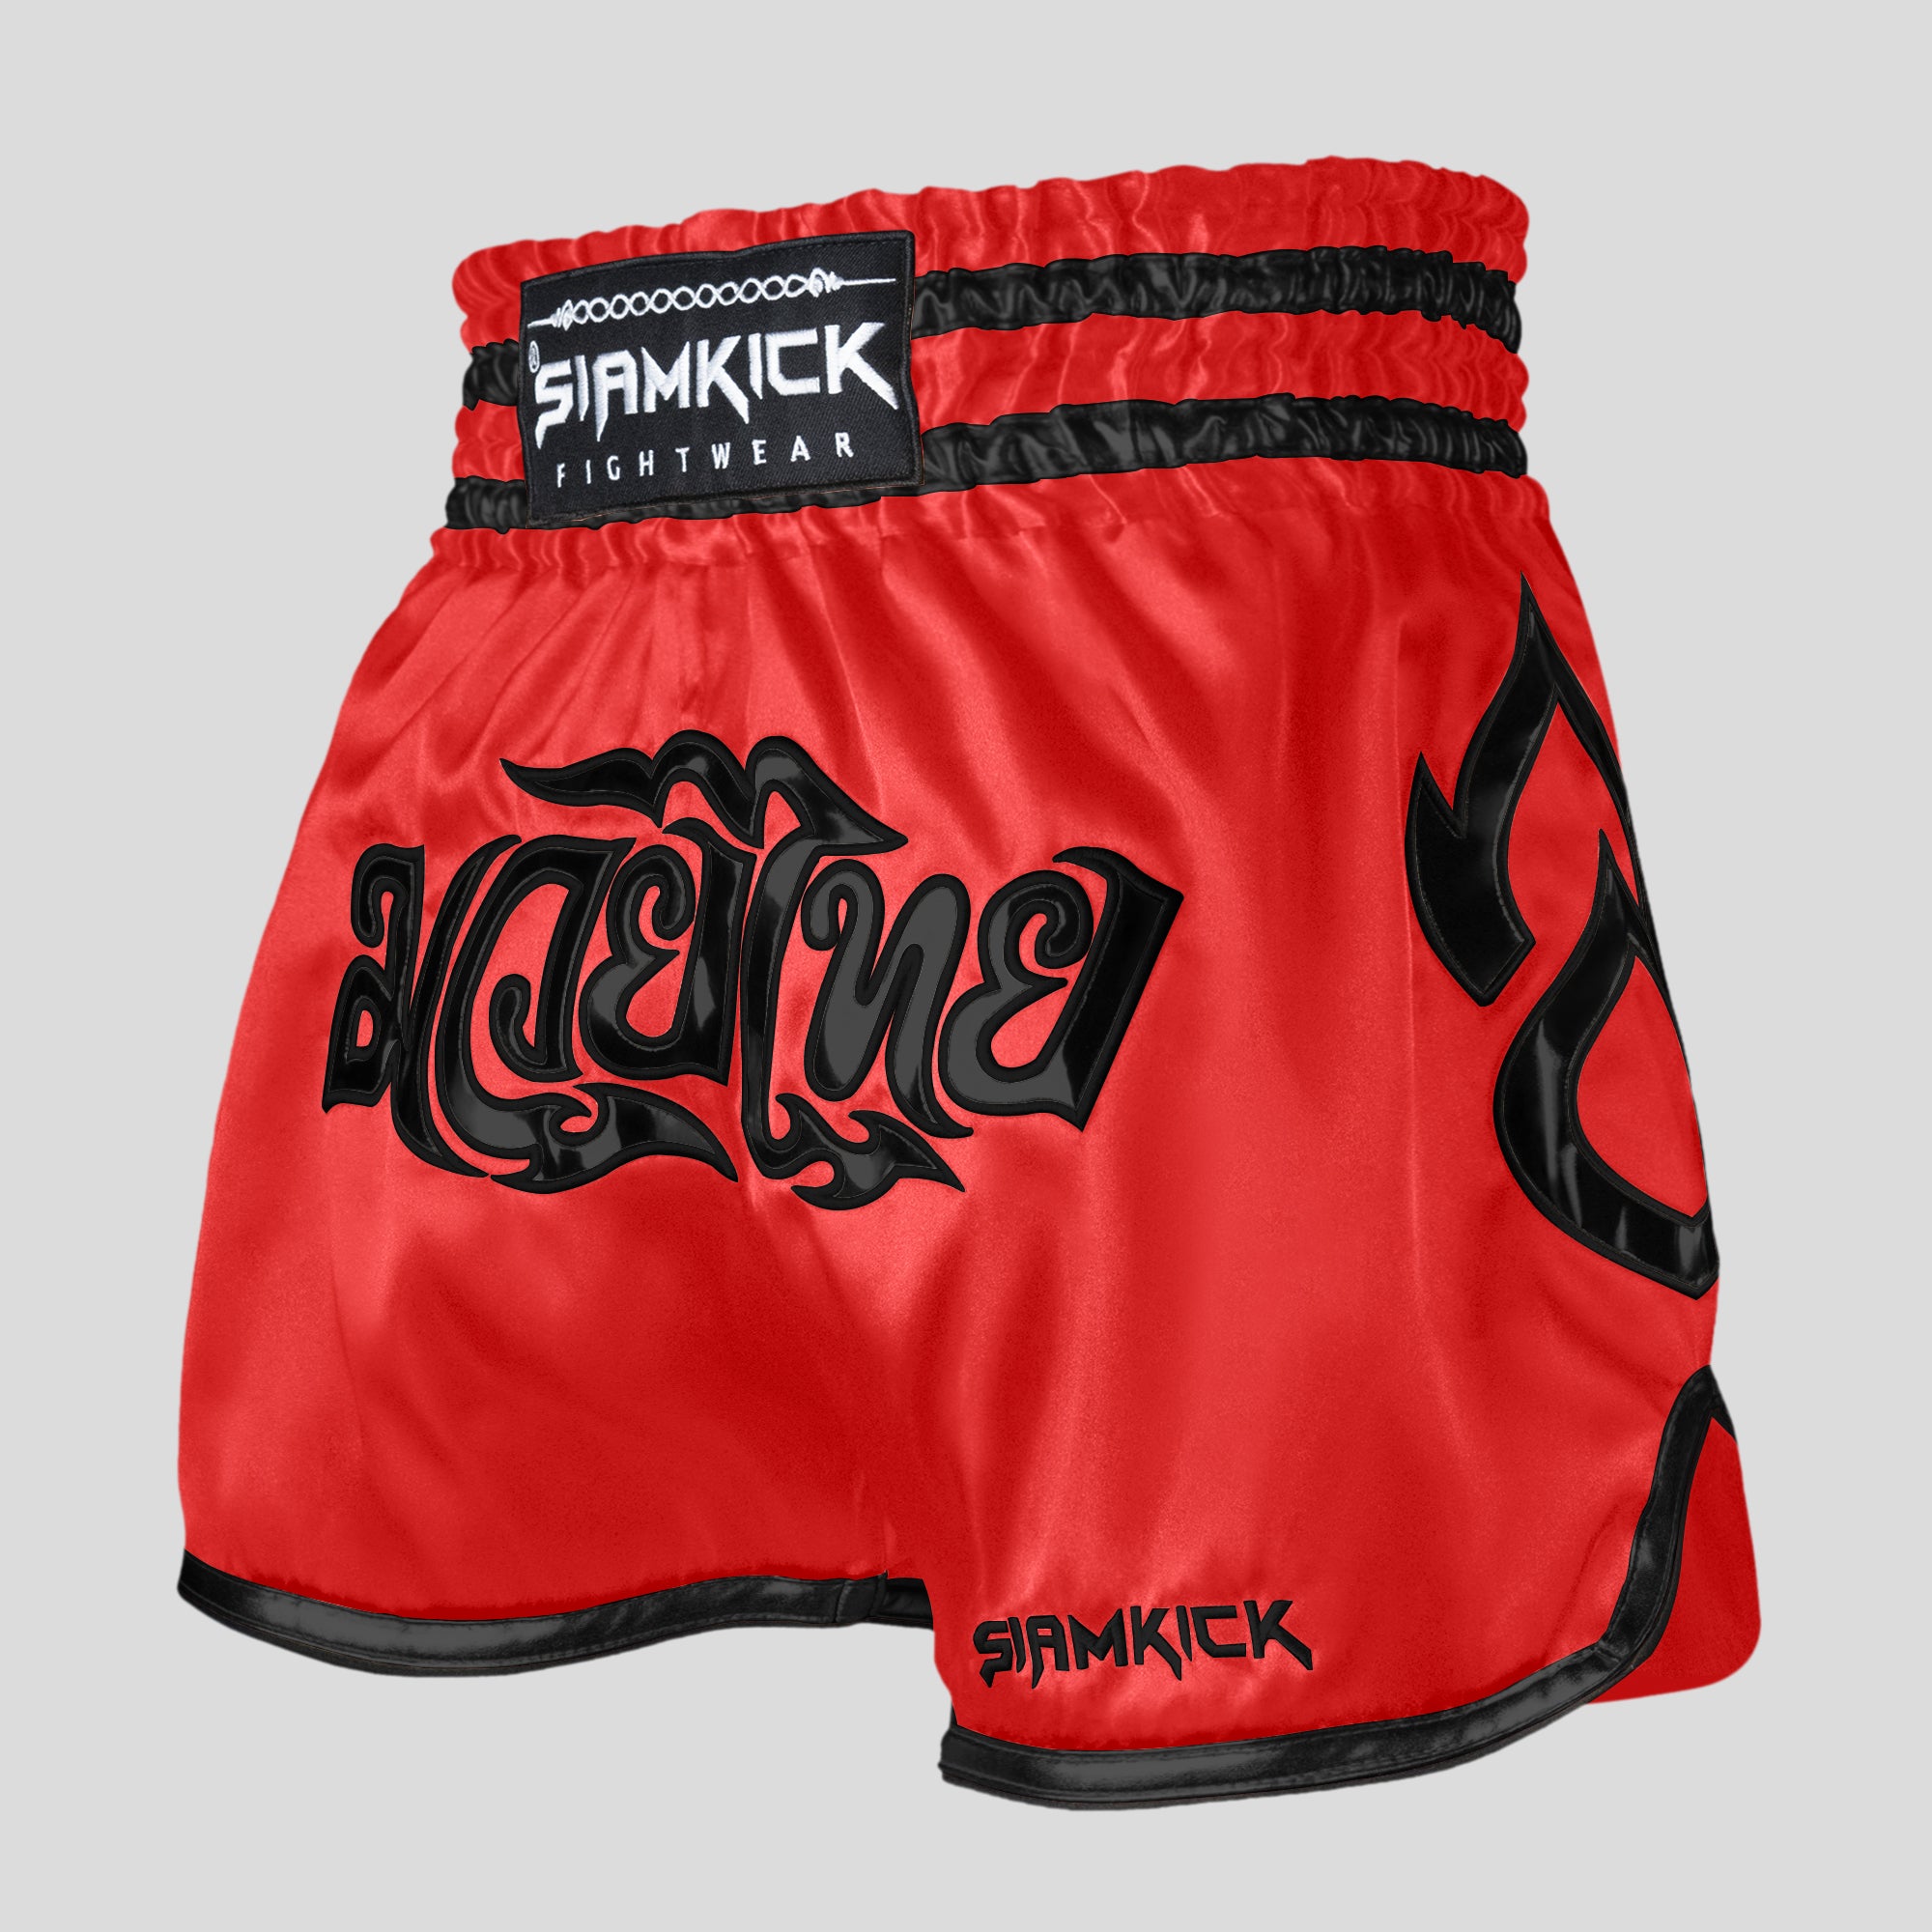 Red Muay Thai Shorts for Men and Women